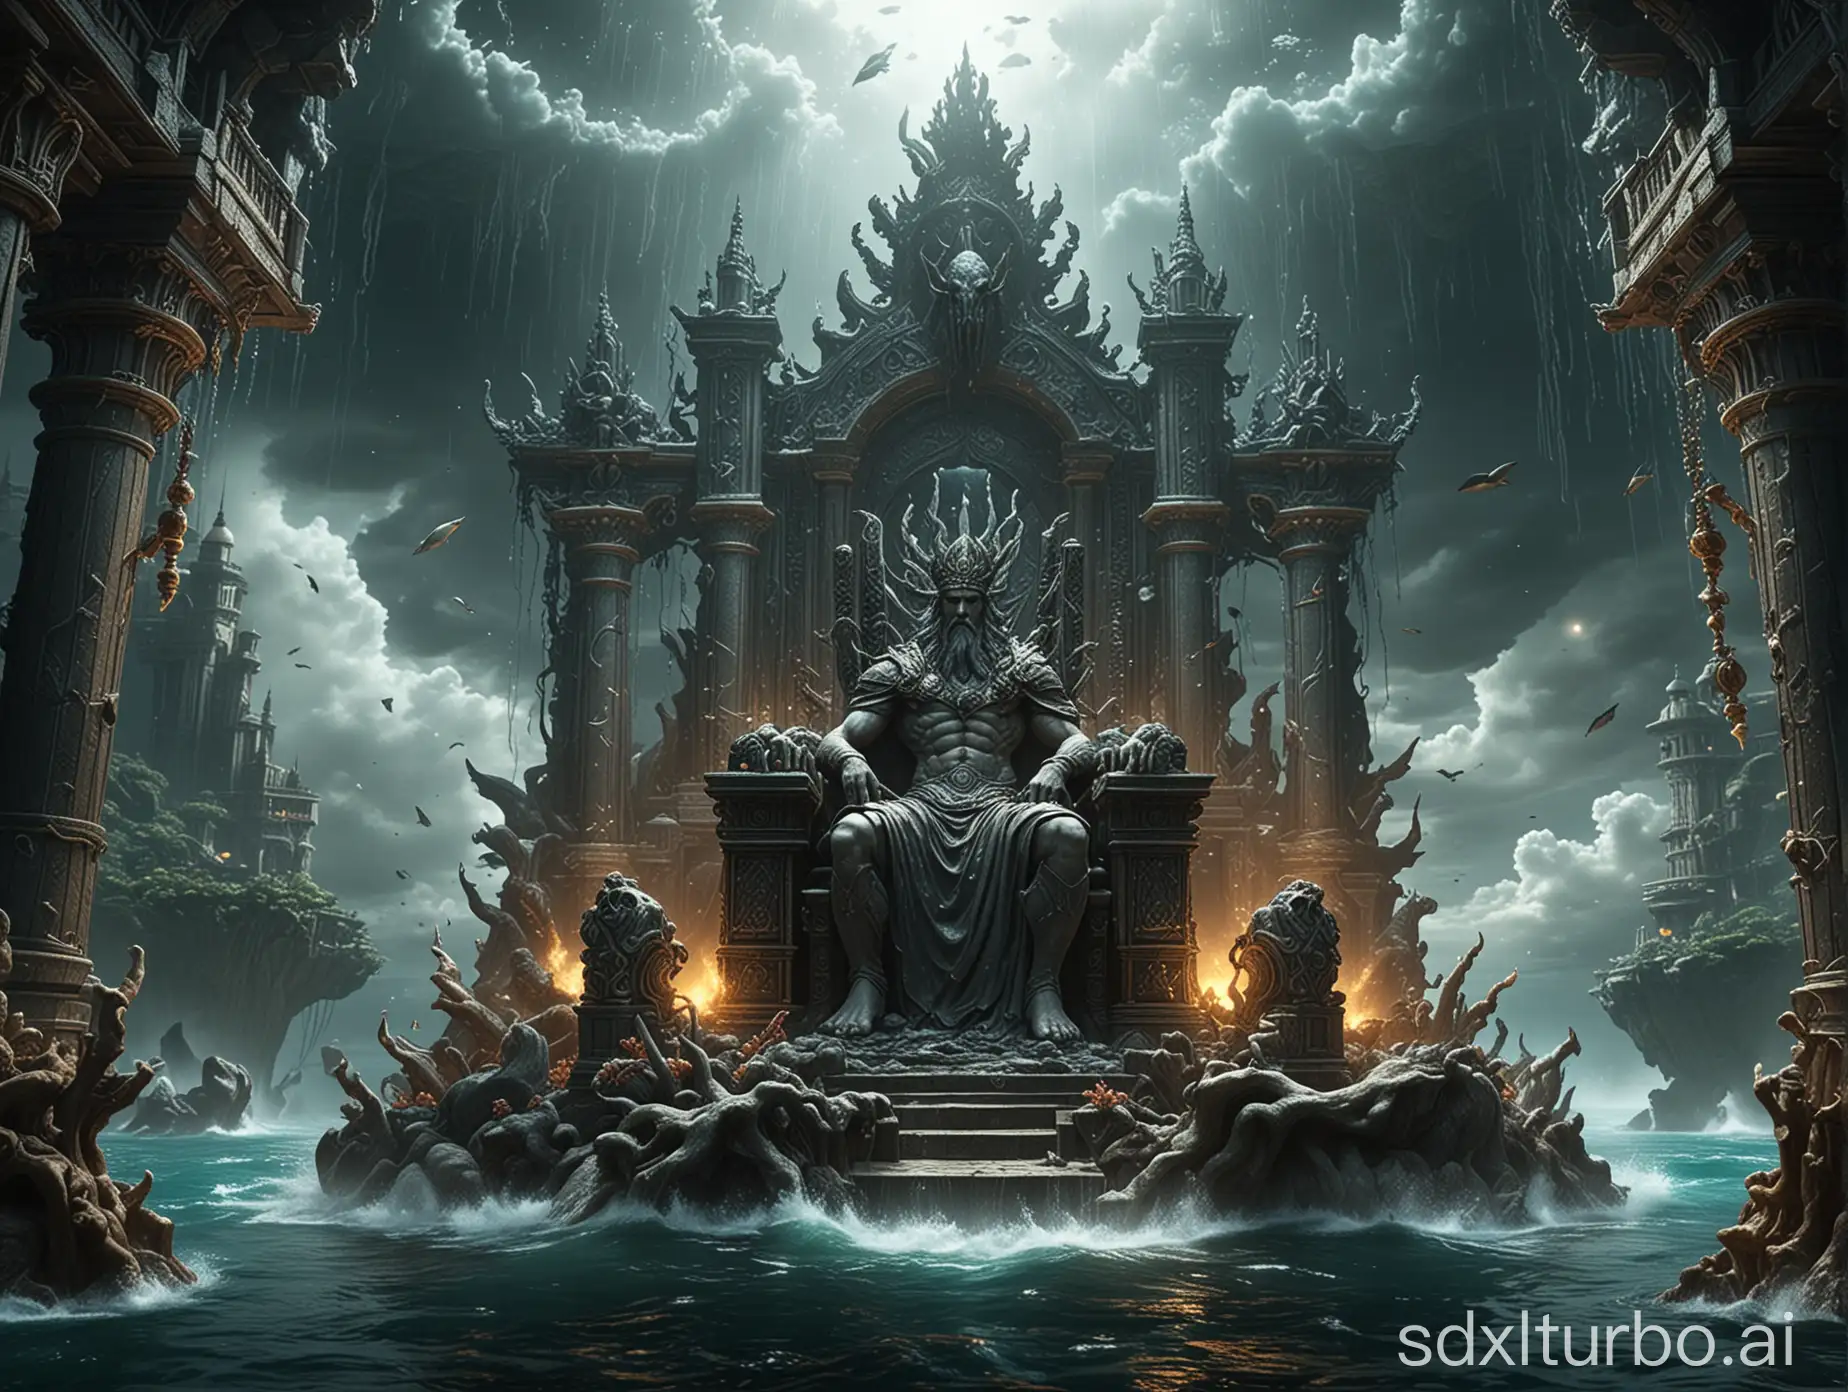 Beneath the depths of the sea, Poseidon's palace shines with mystery. The palace is made of coral and pearls, and Poseidon sits on a golden throne pulled by a sea monster and examines his kingdom of the sea.
Requirements: void arcanist floating in the air overlookinga ruined world， mist， post apocalyptic，photorealistic， octane render， unreal engine， hyperdetailed， volumetric lighting， a character coveredin smoke and lightning，in the style of dark fantasycreatures，multi-layered figures， mirrored realms，strong contrast between light and dark， high angle view， aerial view， long shot， 8k， high details，HDR --ar 3:4 --q 2 --v 5 --s 750